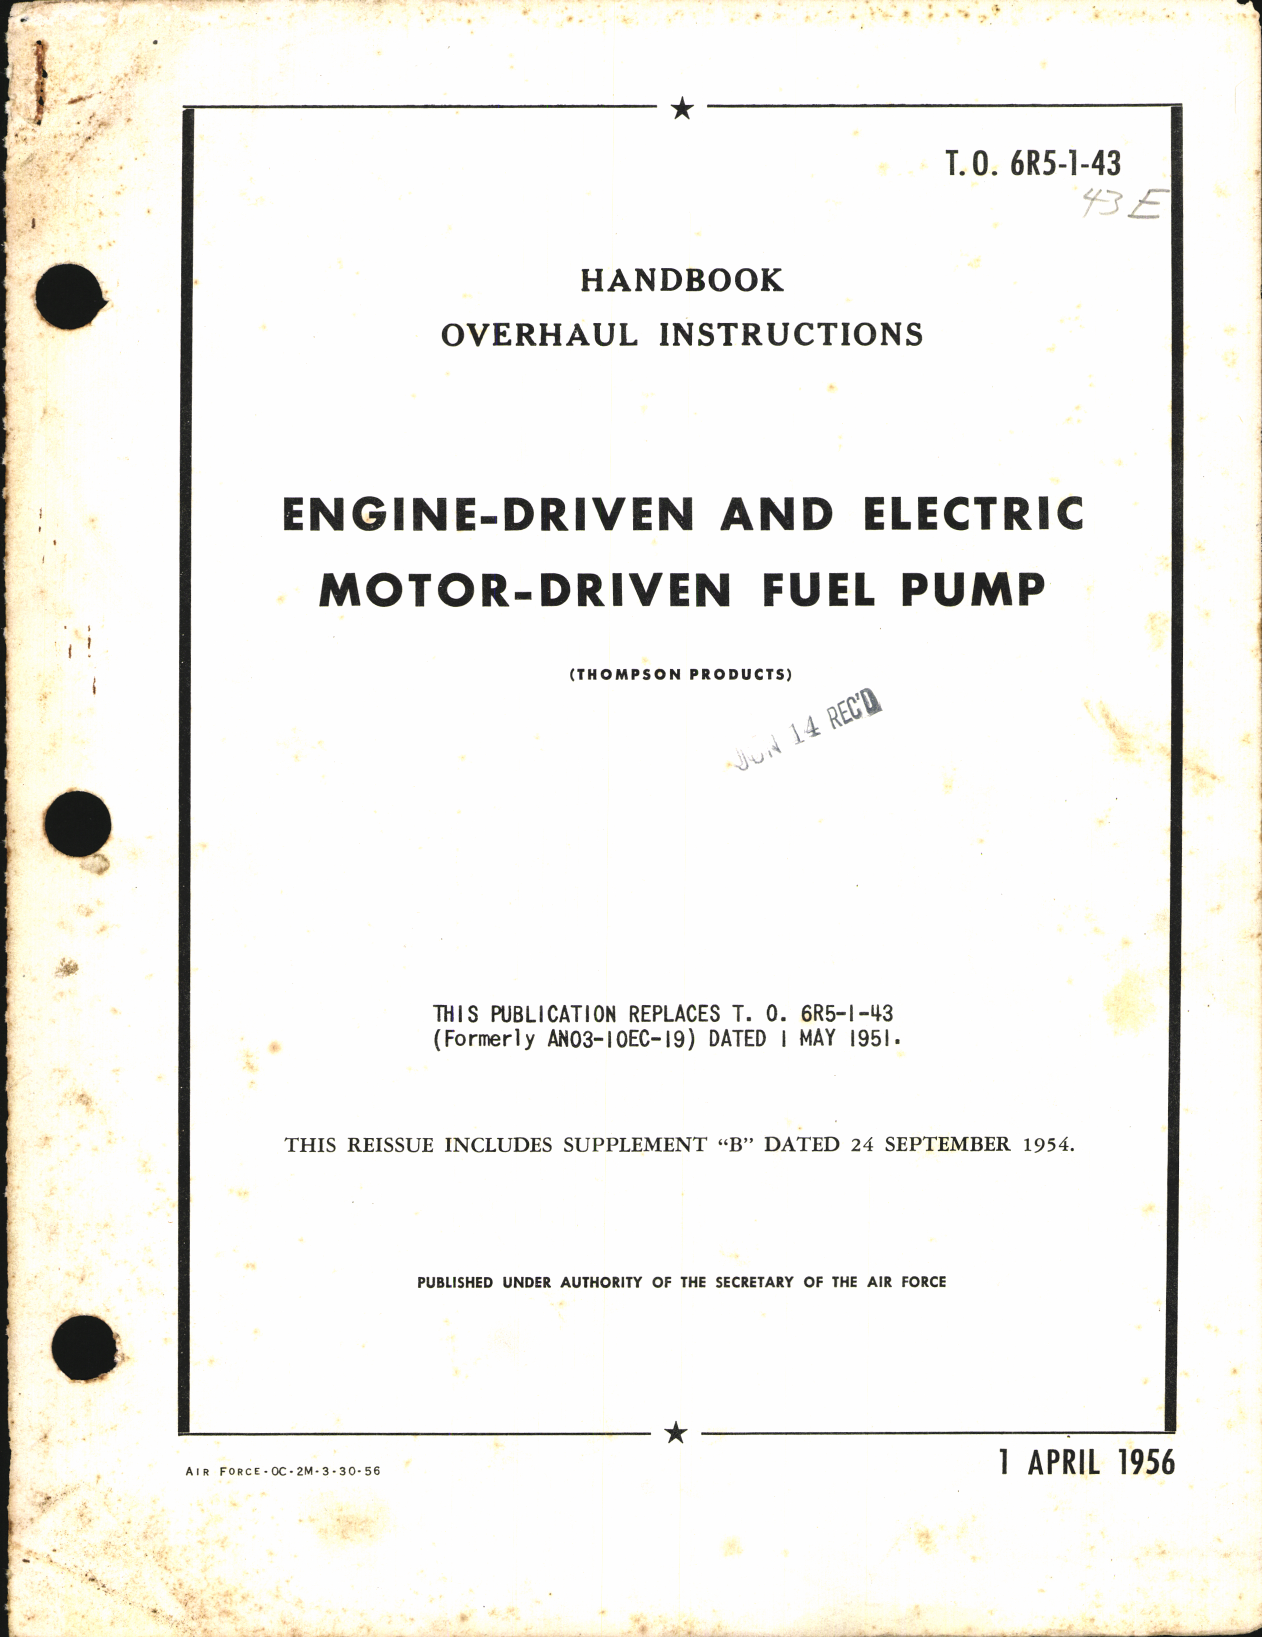 Sample page 1 from AirCorps Library document: Overhaul Instructions for Engine-Driven and Electric Motor-Driven Fuel Pump